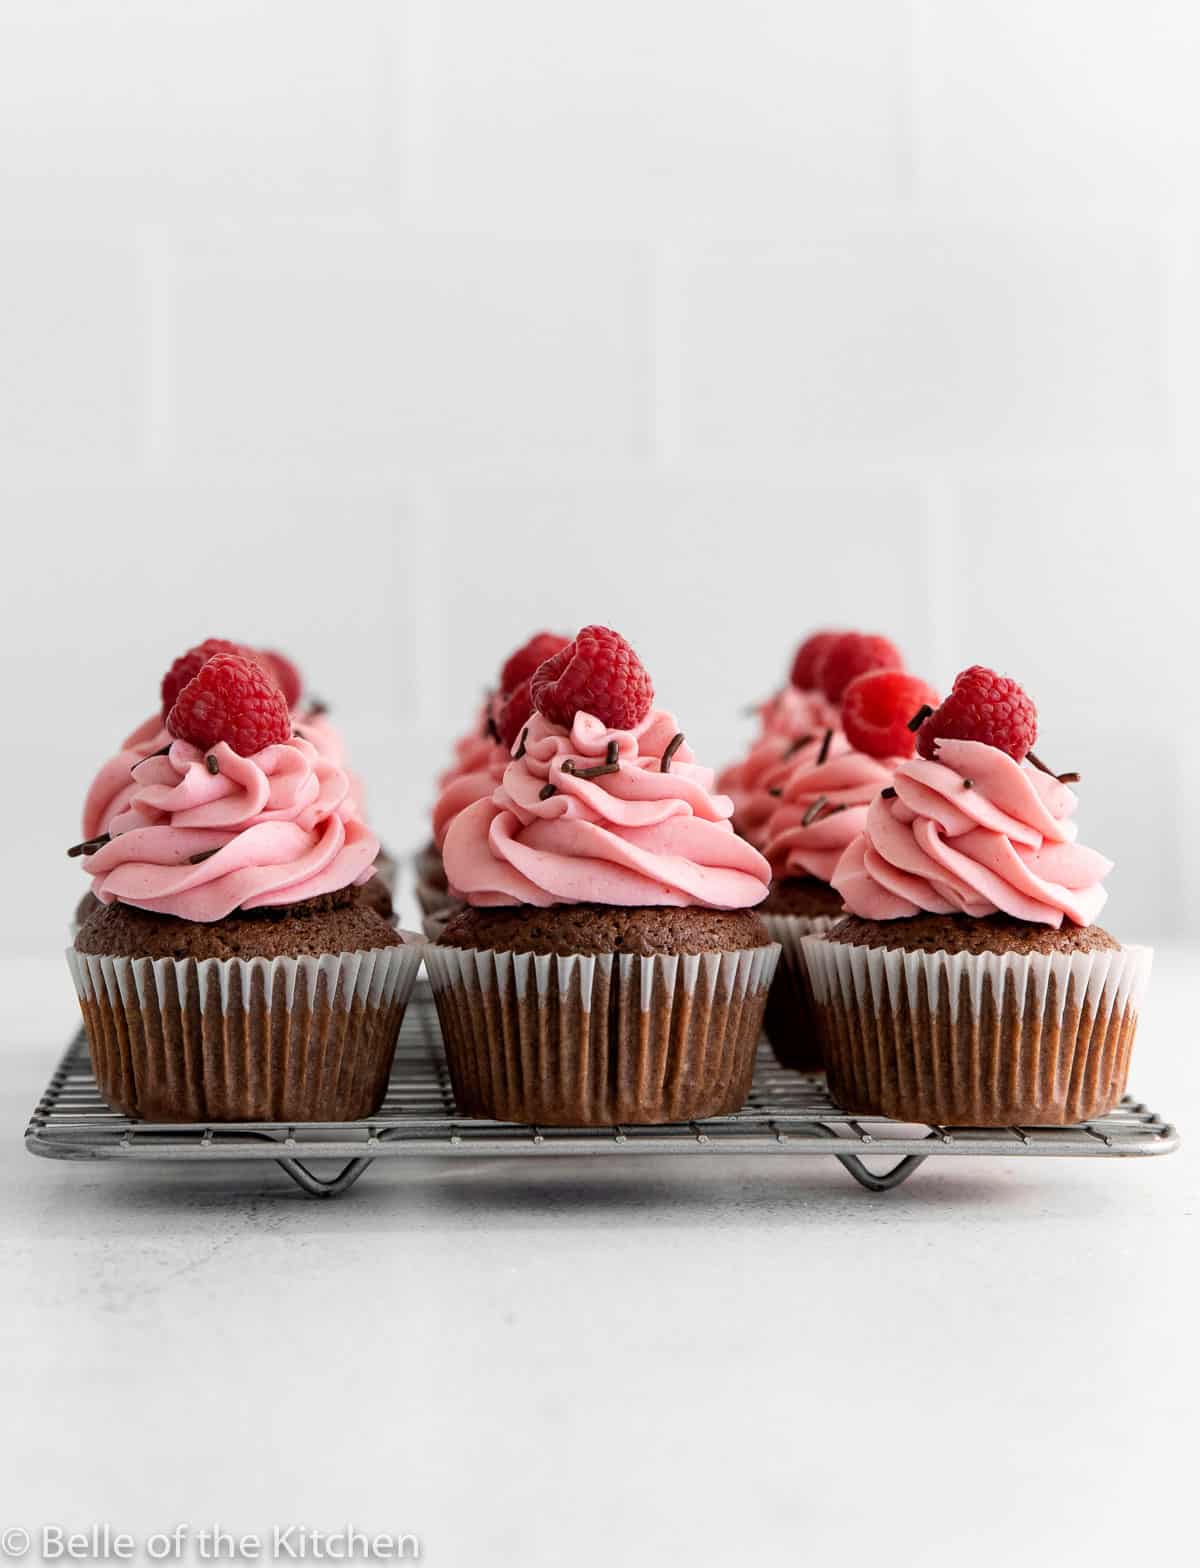 chocolate raspberry cupcakes on a wire rack.